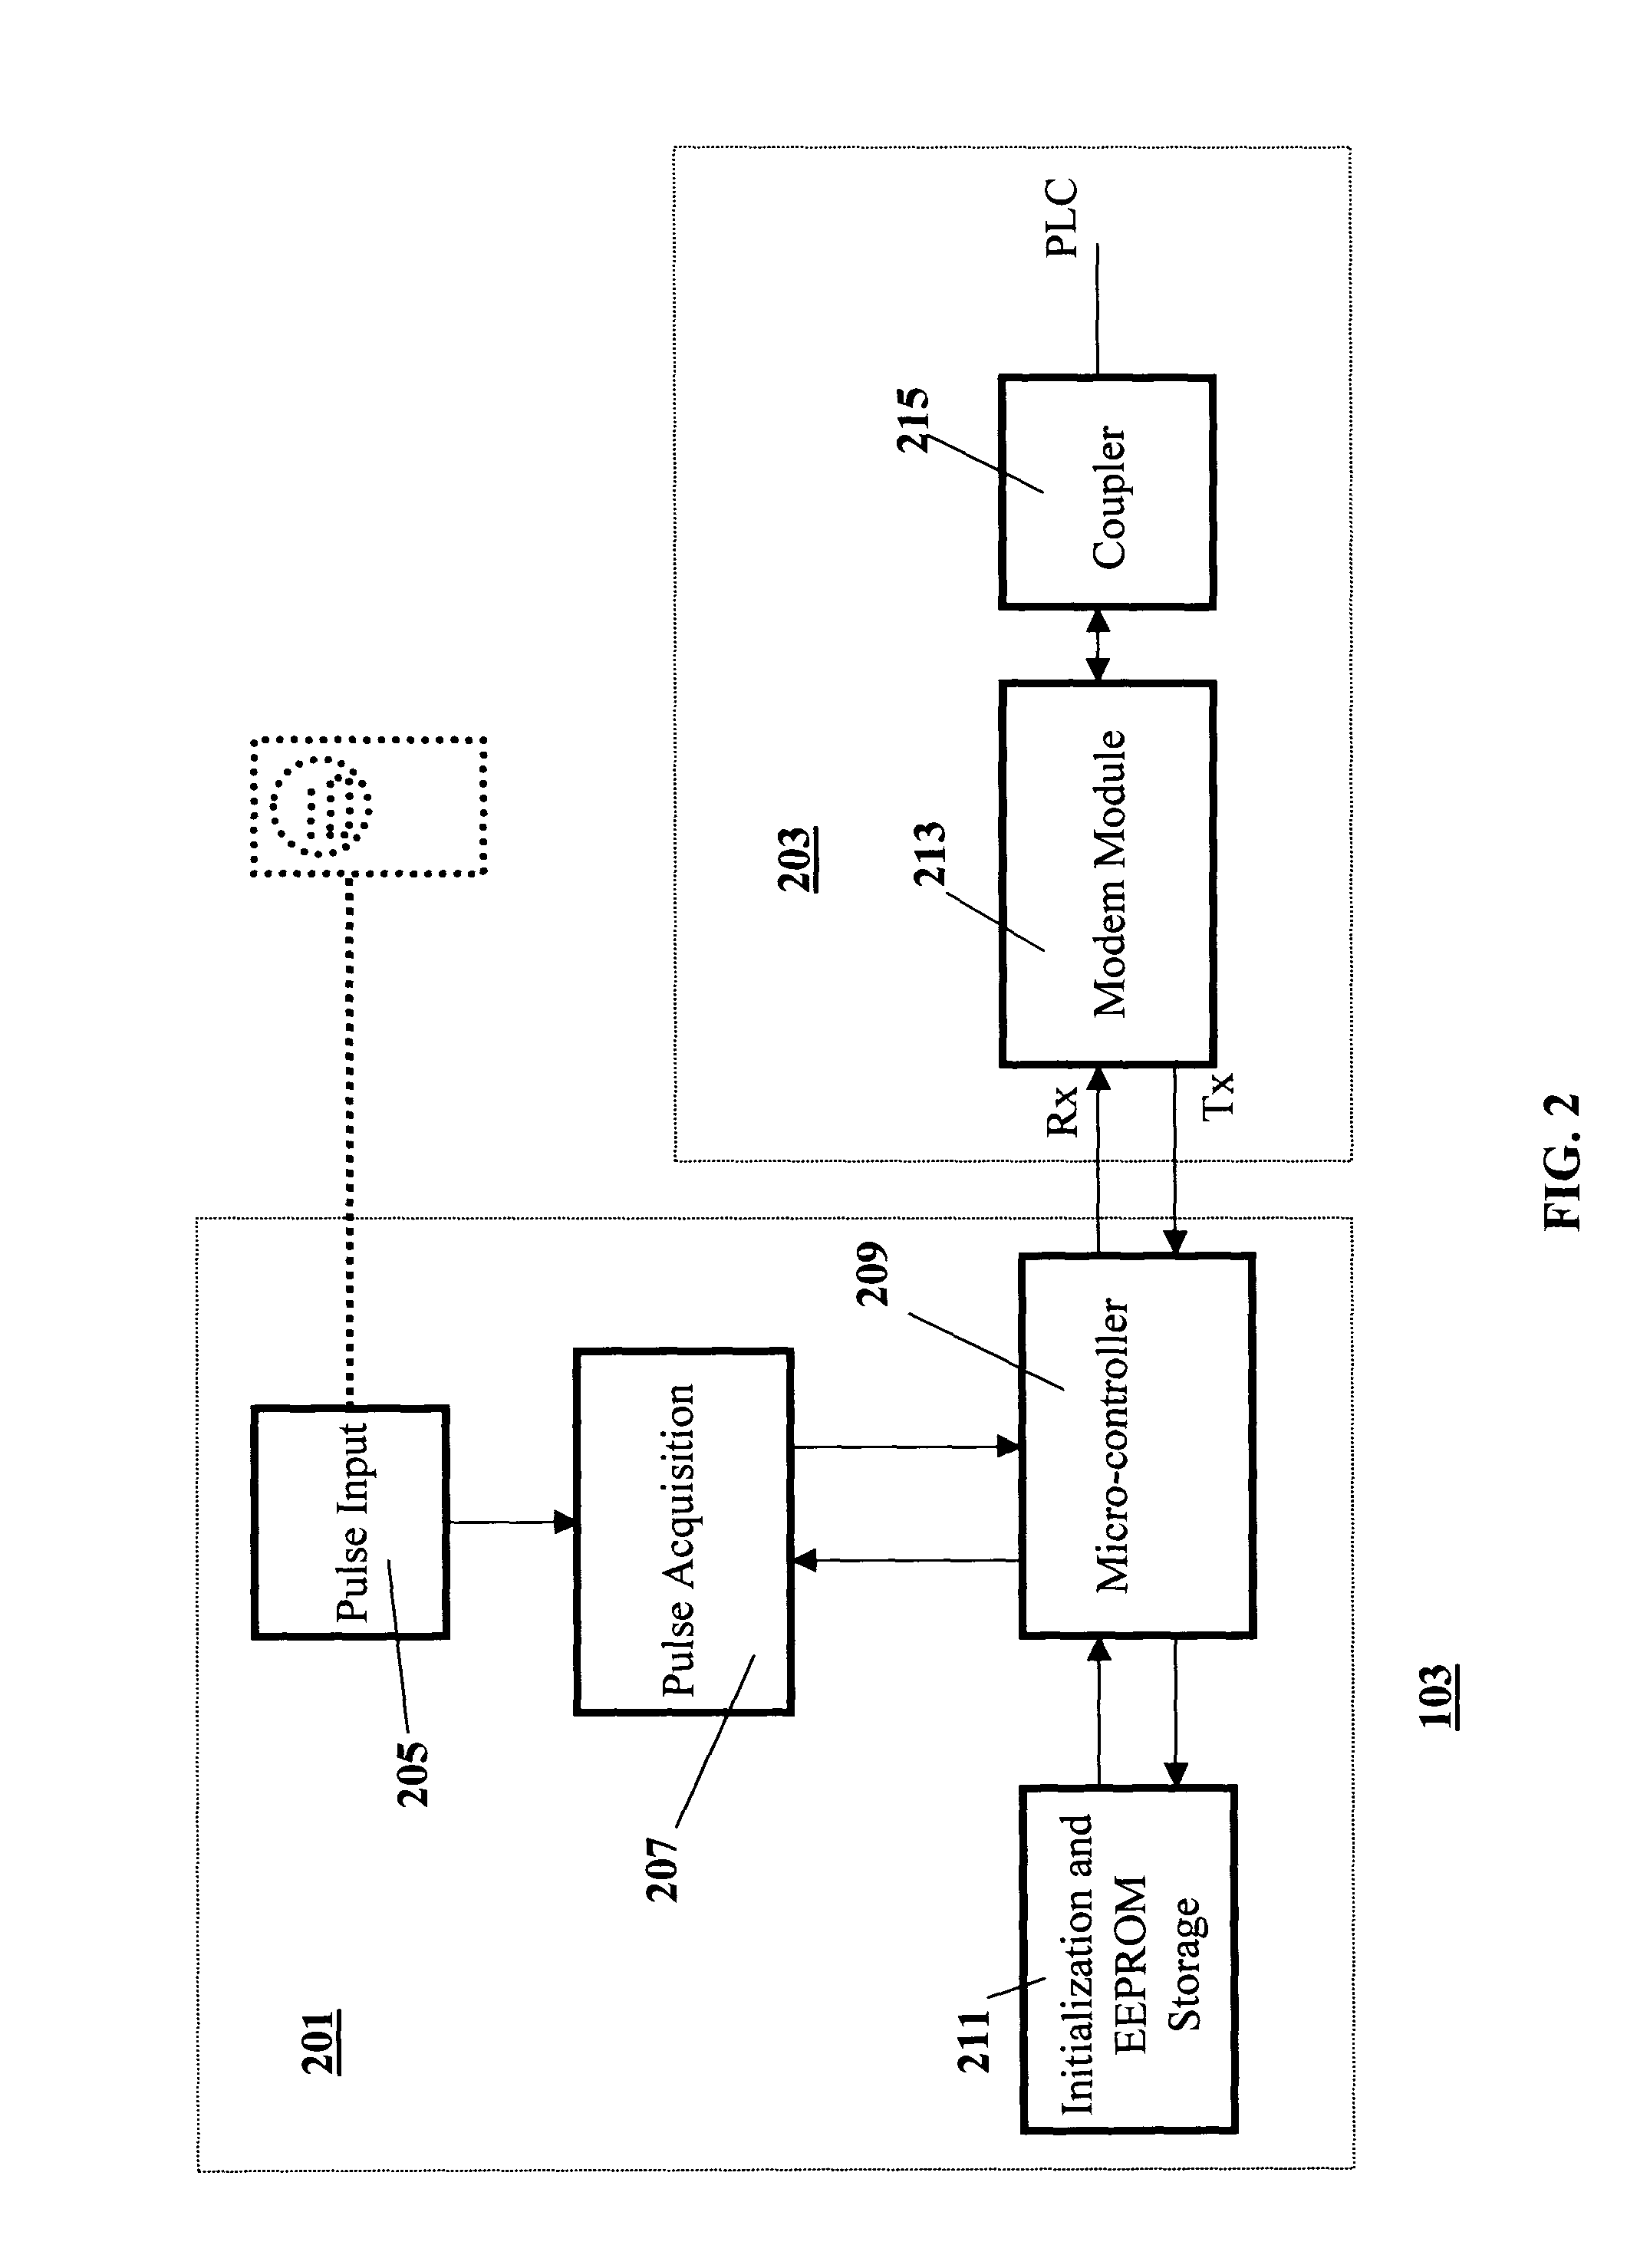 Automated utility metering system